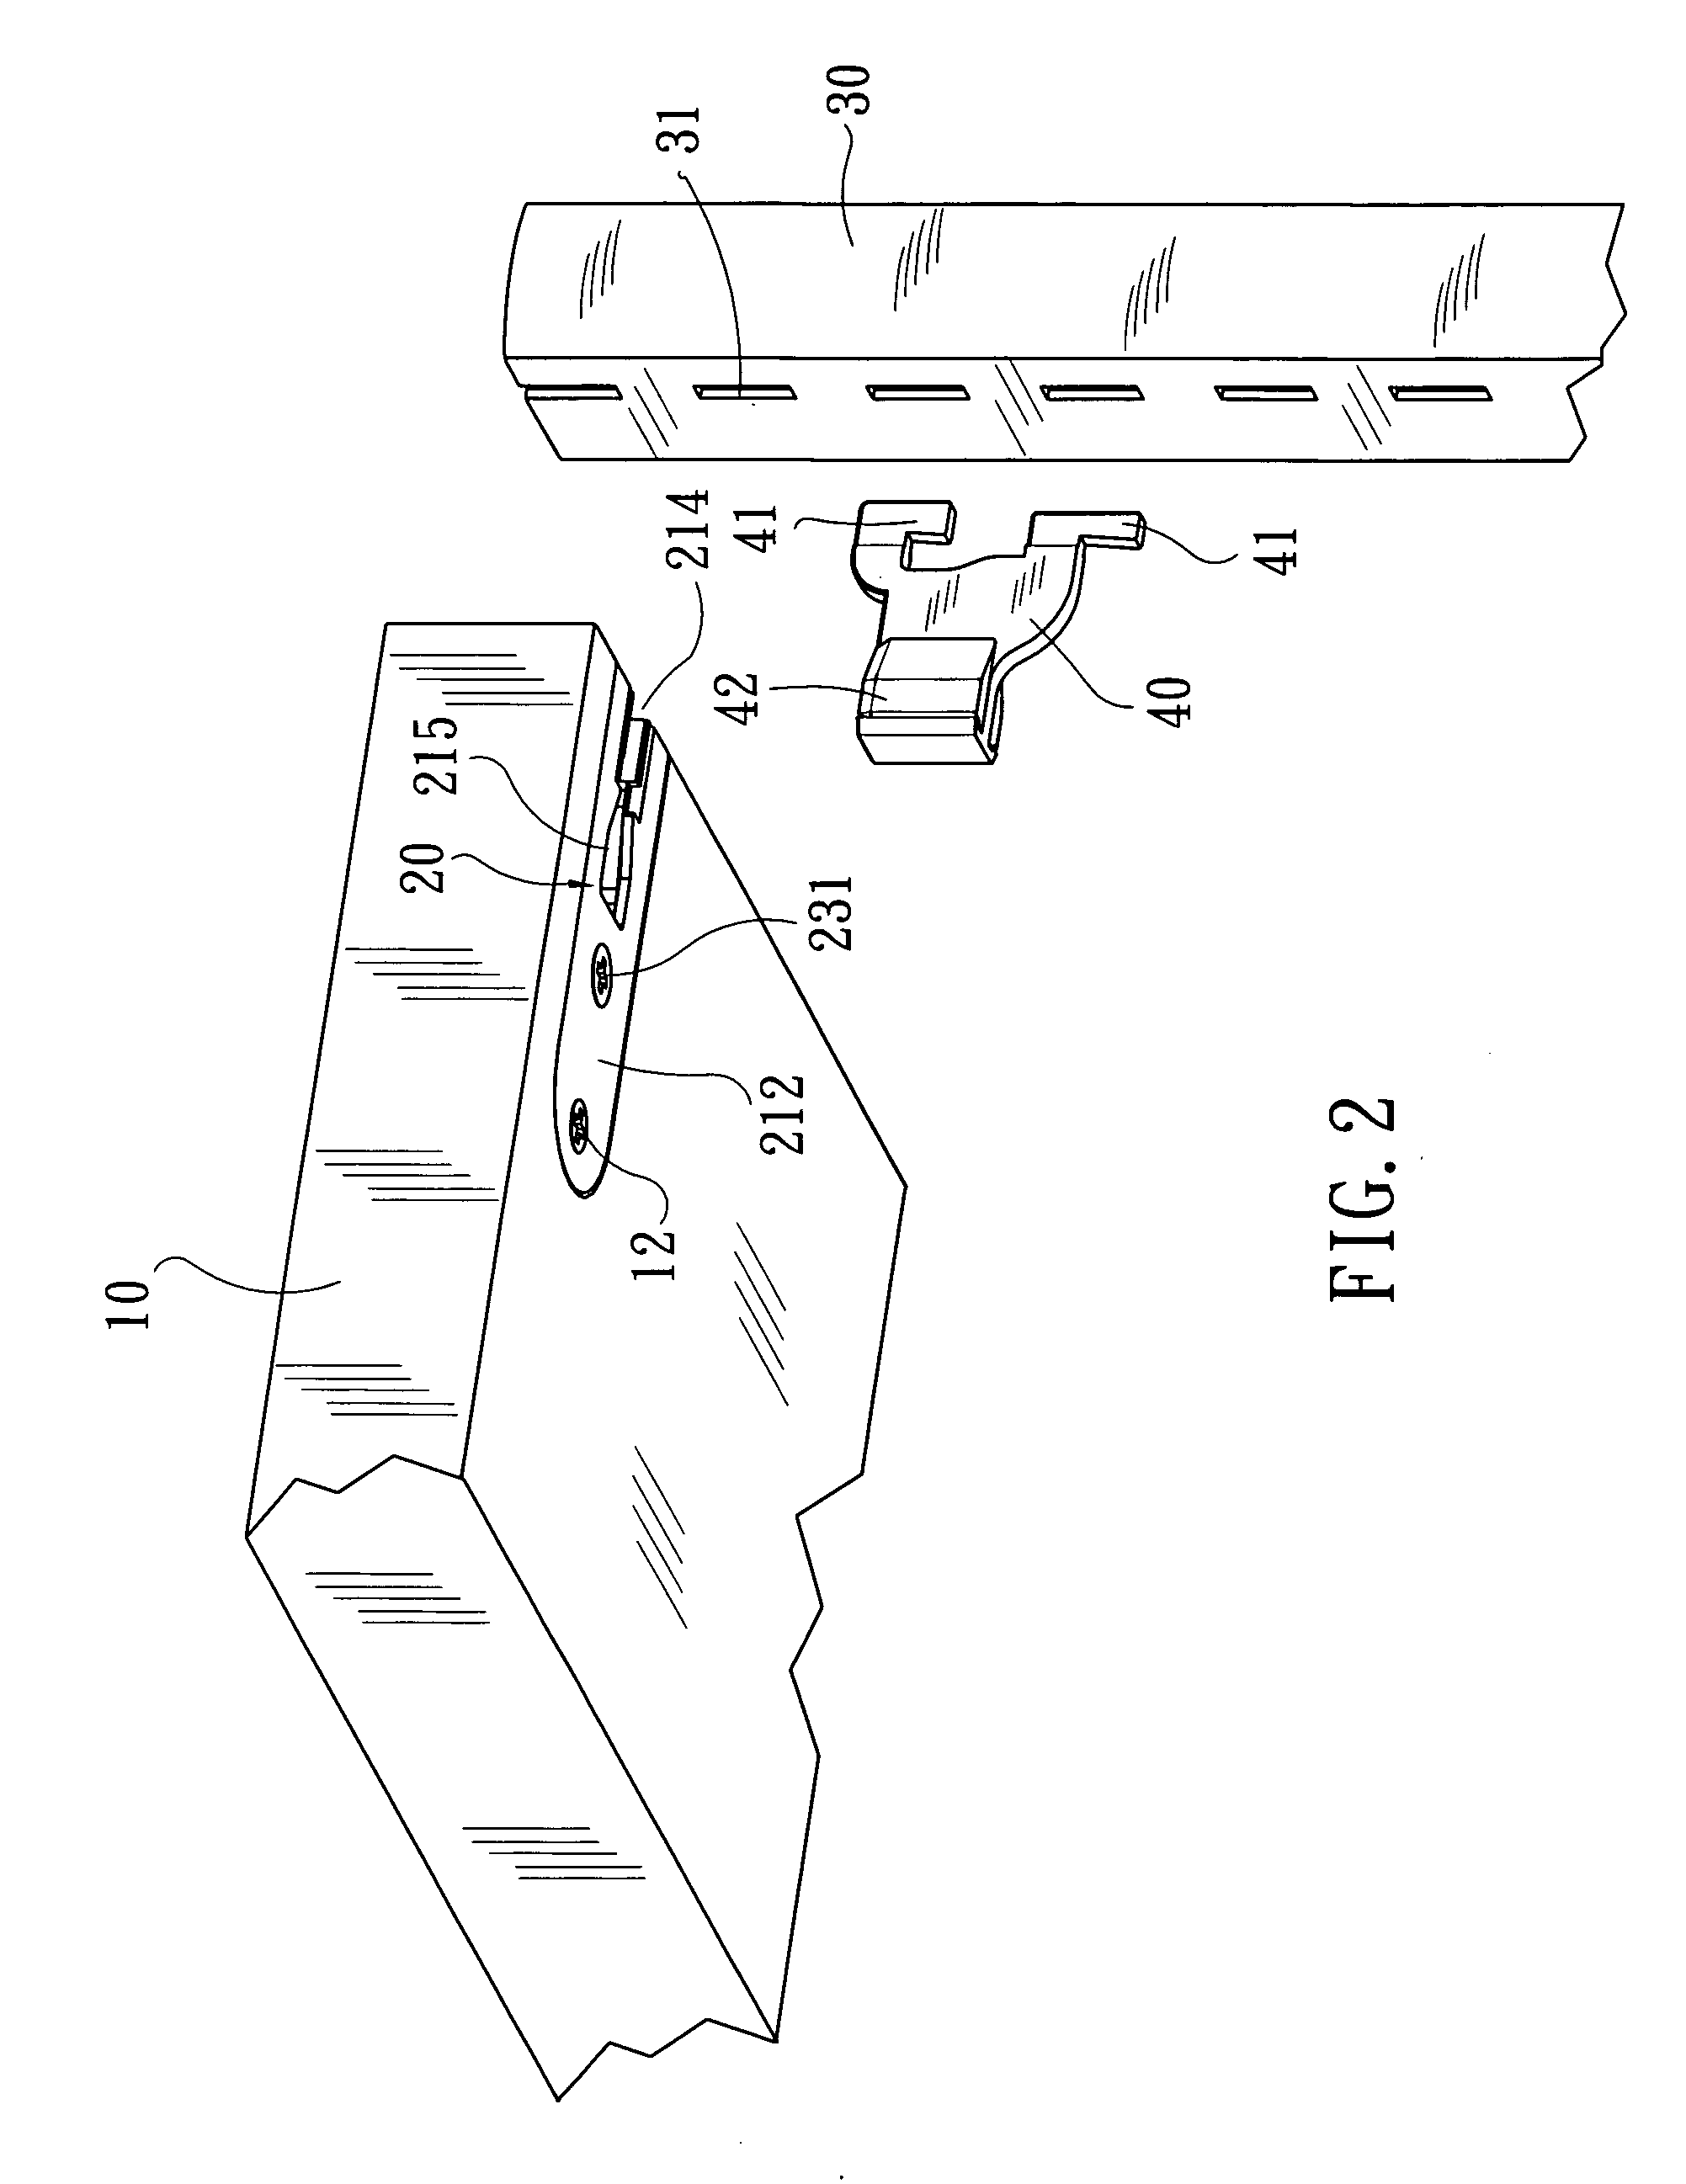 Coupling mechanism for connecting board-type shelf to vertical post of a sectional rack